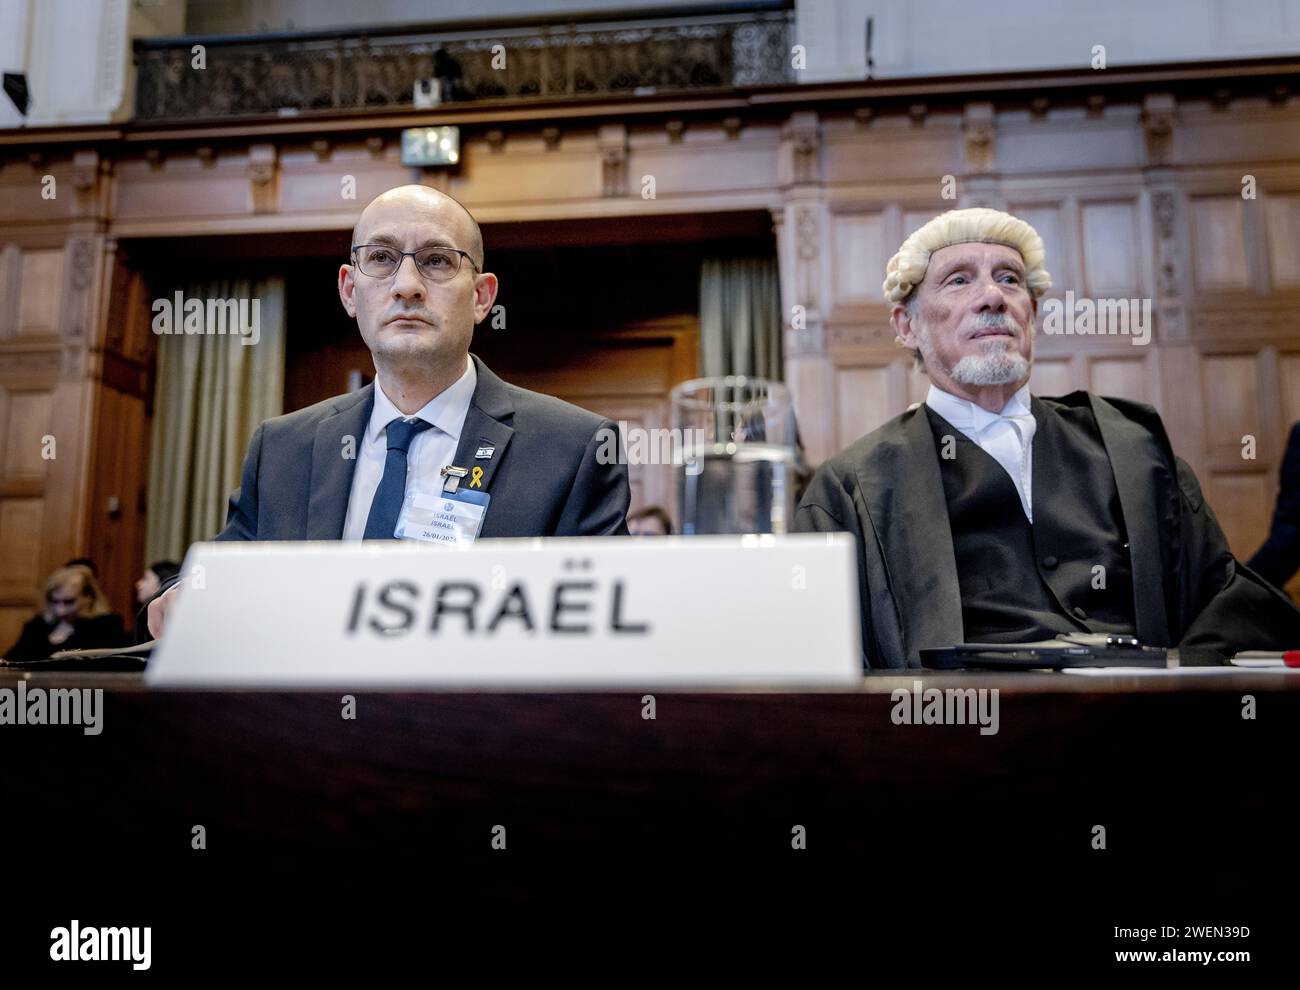 THE HAGUE - Gilad Noam, Deputy Attorney-General for International Affairs, and lawyer Malcolm Shaw, during a ruling by the International Court of Justice (ICJ) on a request by South Africa for emergency measures for Gaza. Earlier this month, the court heard the genocide case against Israel, brought by South Africa. The entire case can take years to complete. ANP REMKO DE WAAL netherlands out - belgium out Stock Photo